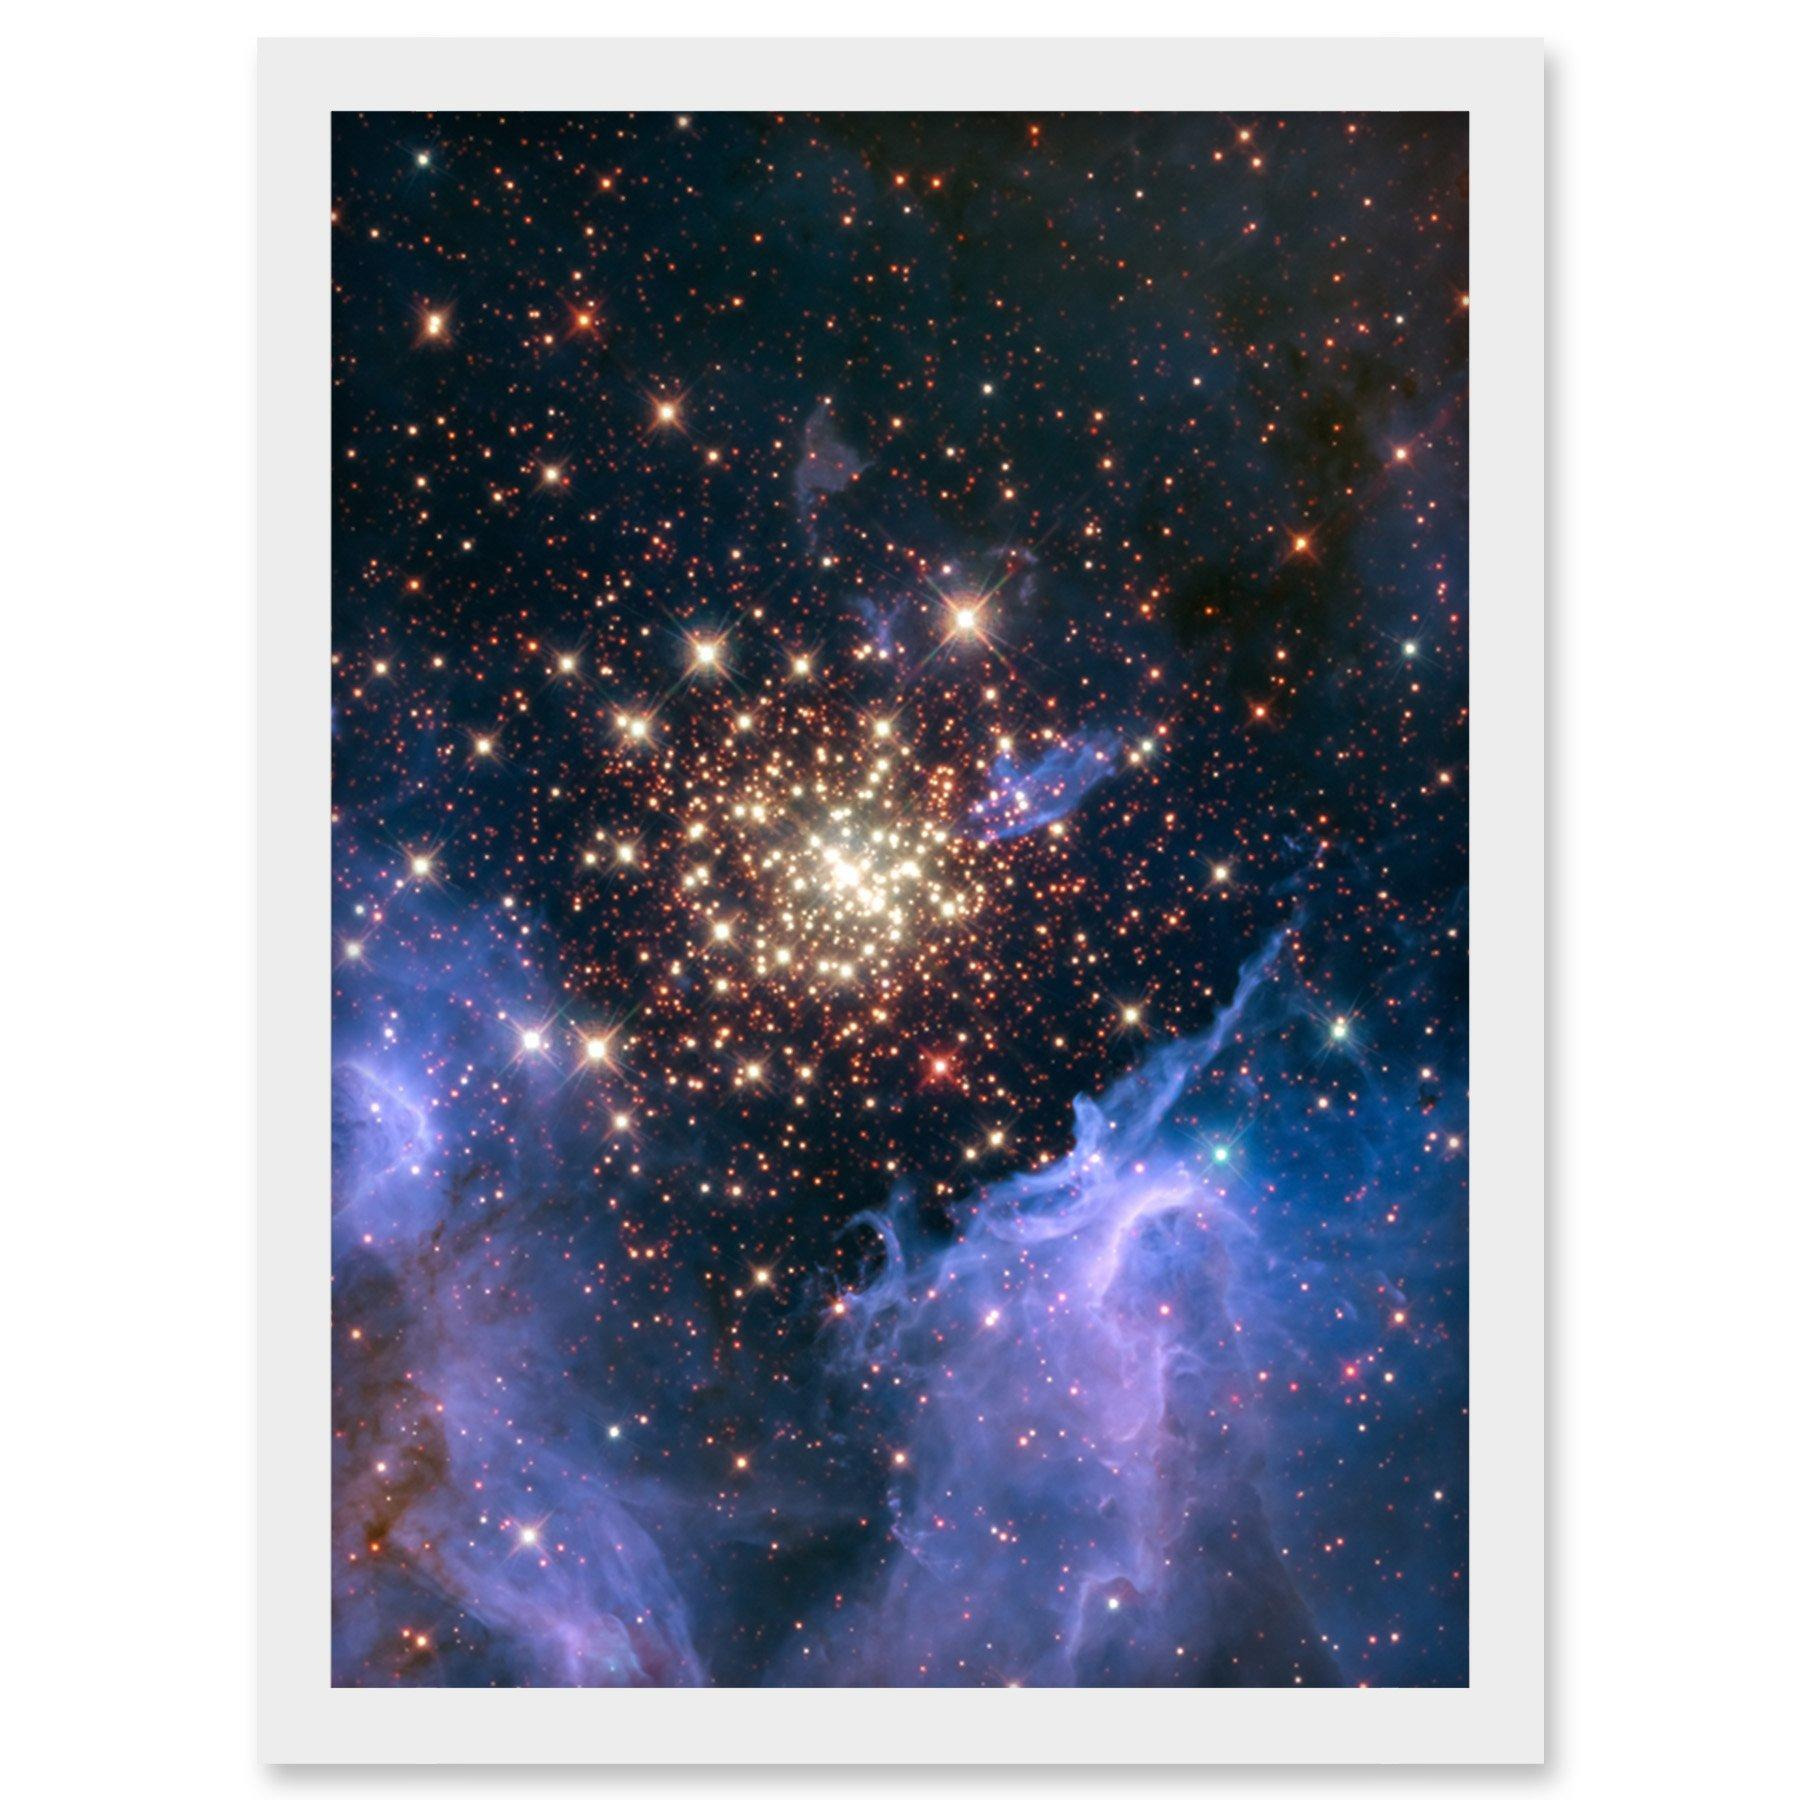 Hubble Space Telescope Image Starburst Cluster NGC 3603 Nebula Resembles Celestial Fireworks Surrounded By Clouds Of Interstellar Gas And Dust Art Print Framed Poster Wall Decor - image 1